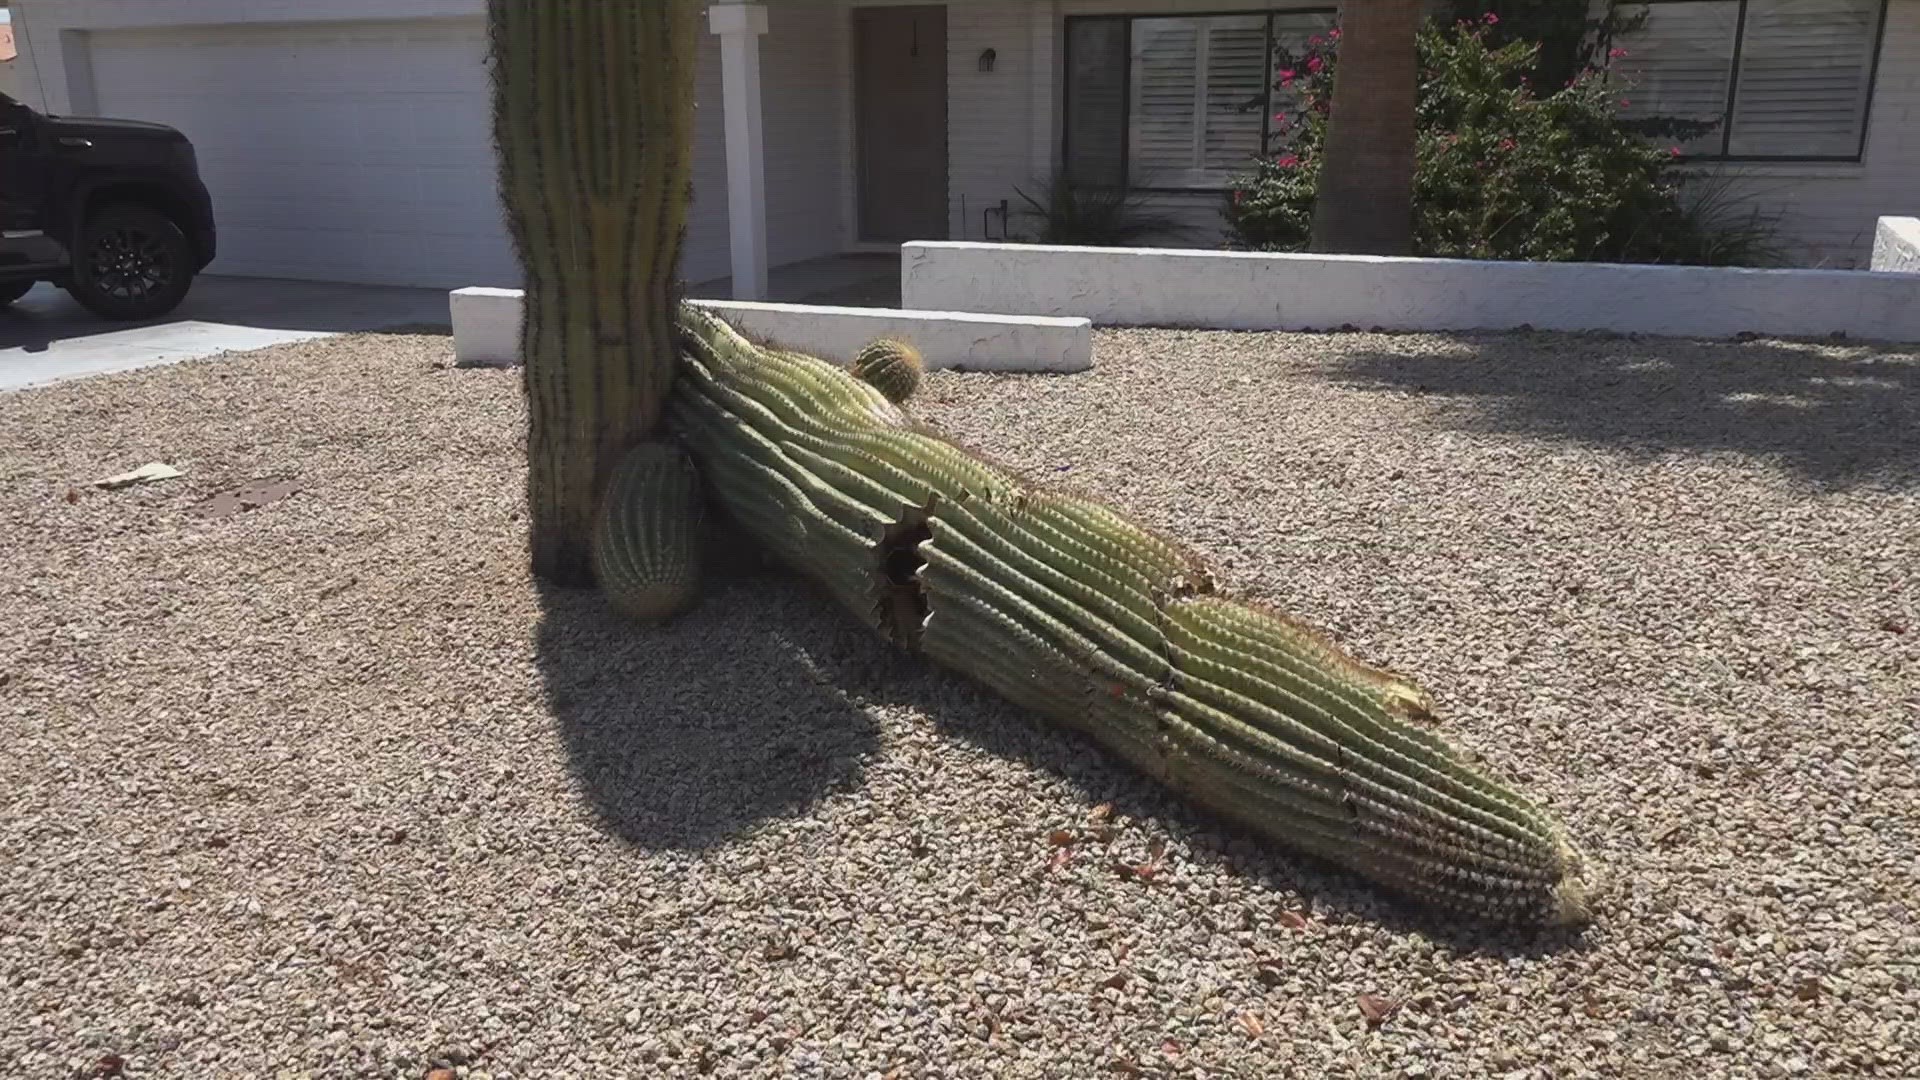 Dead saguaros can be worth hundreds, maybe thousands of dollars...if you wait long enough.